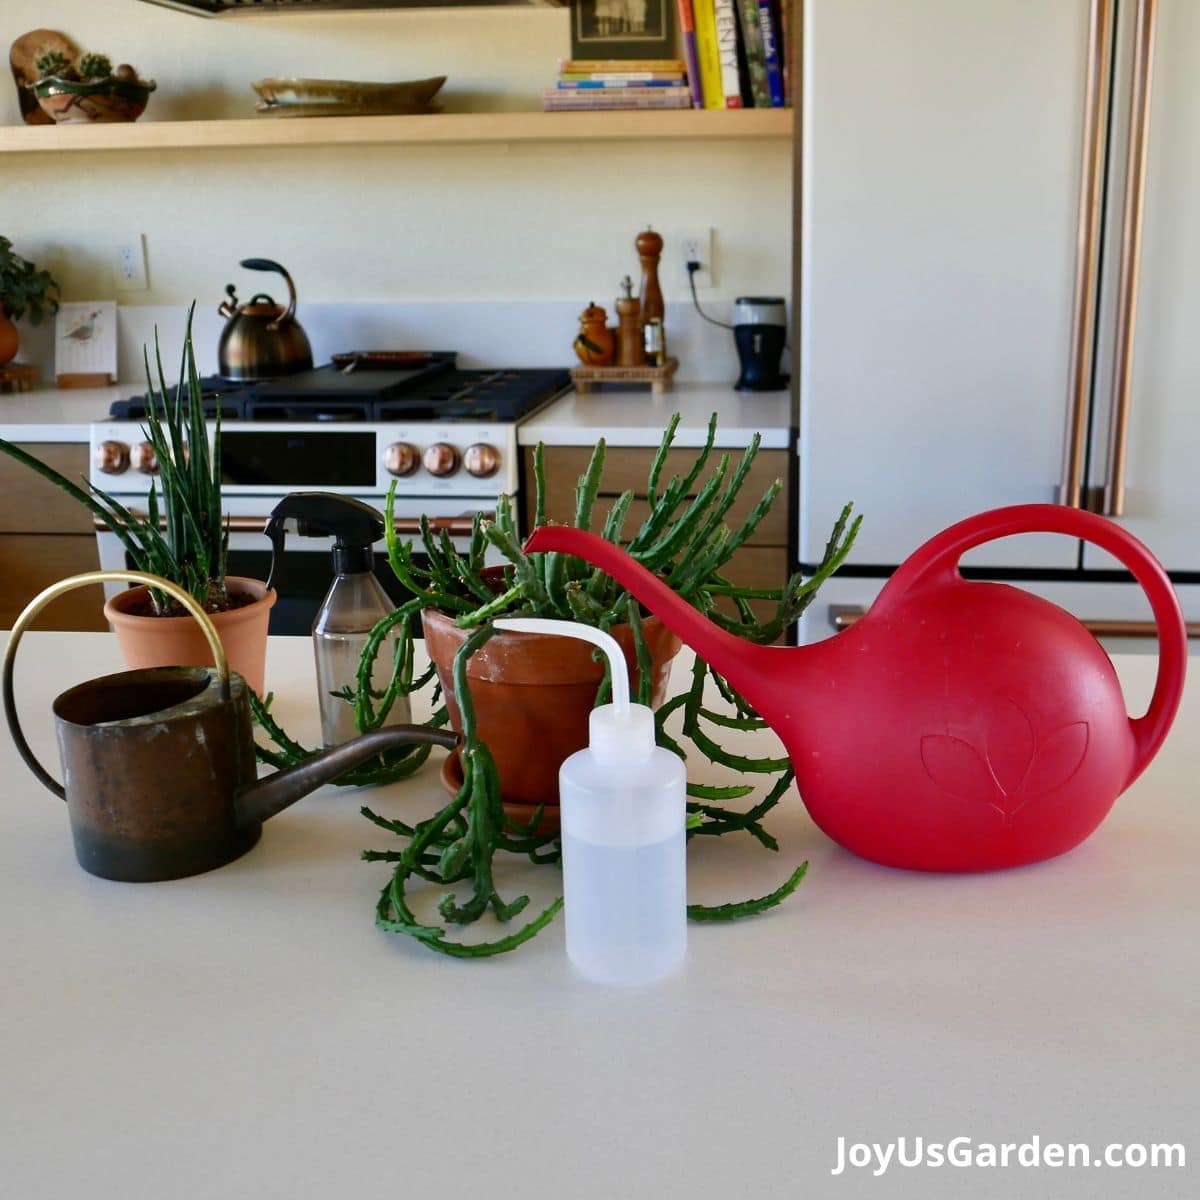 2 watering cans, a small squeeze bottle, and a spray bottle sit on kitchen counter with 2 plants